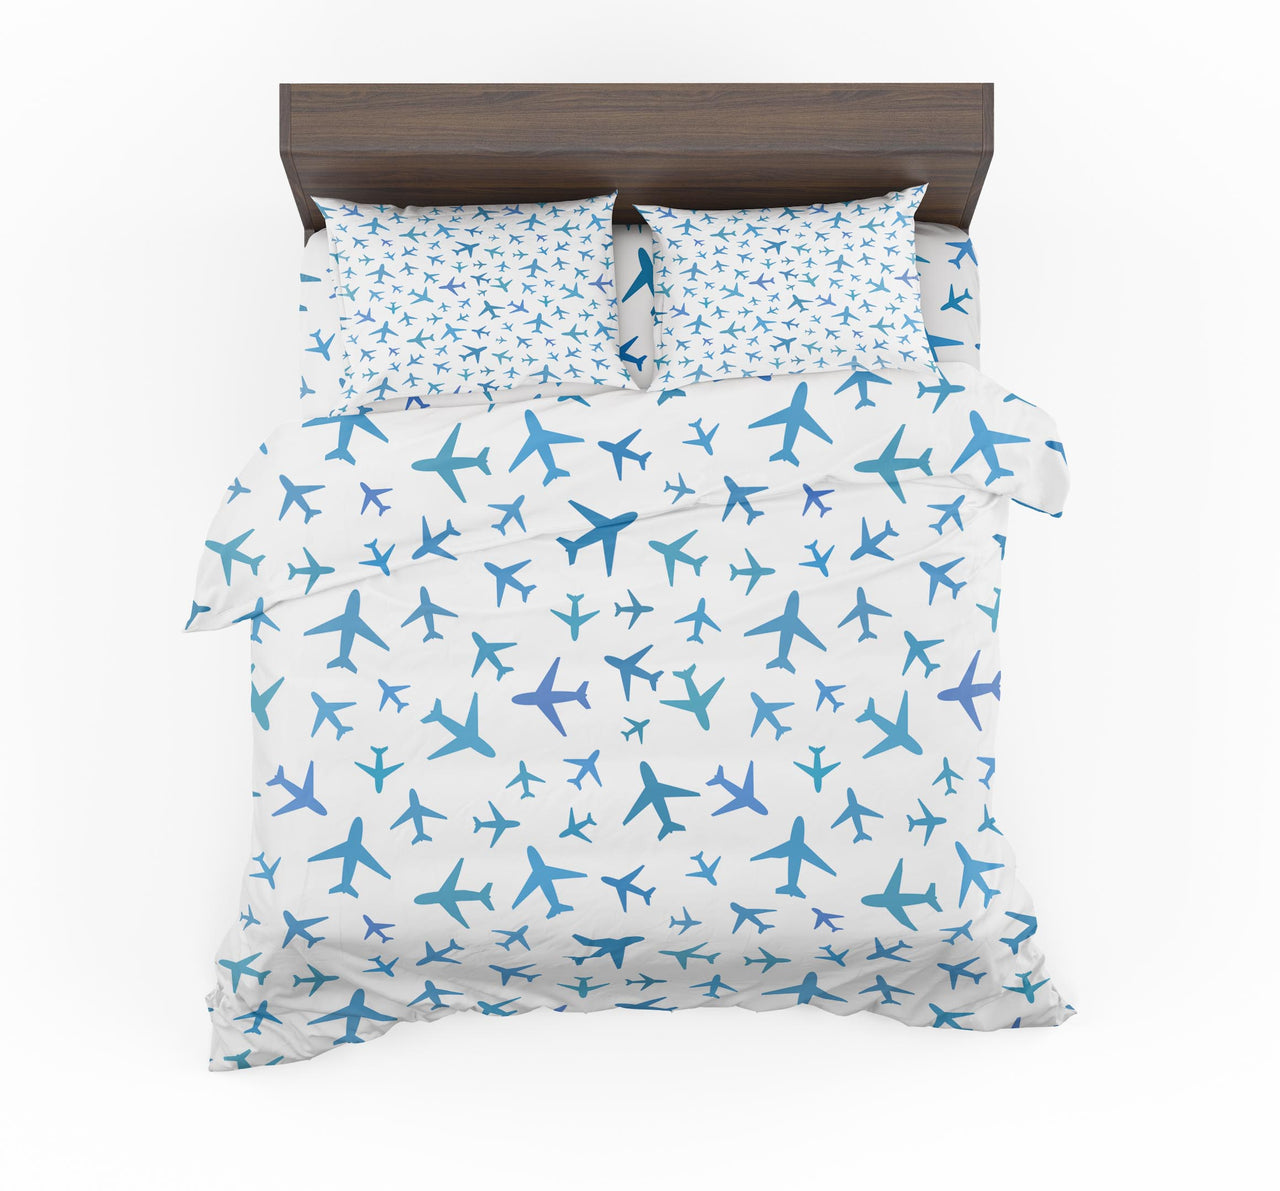 Many Airplanes Designed Bedding Sets